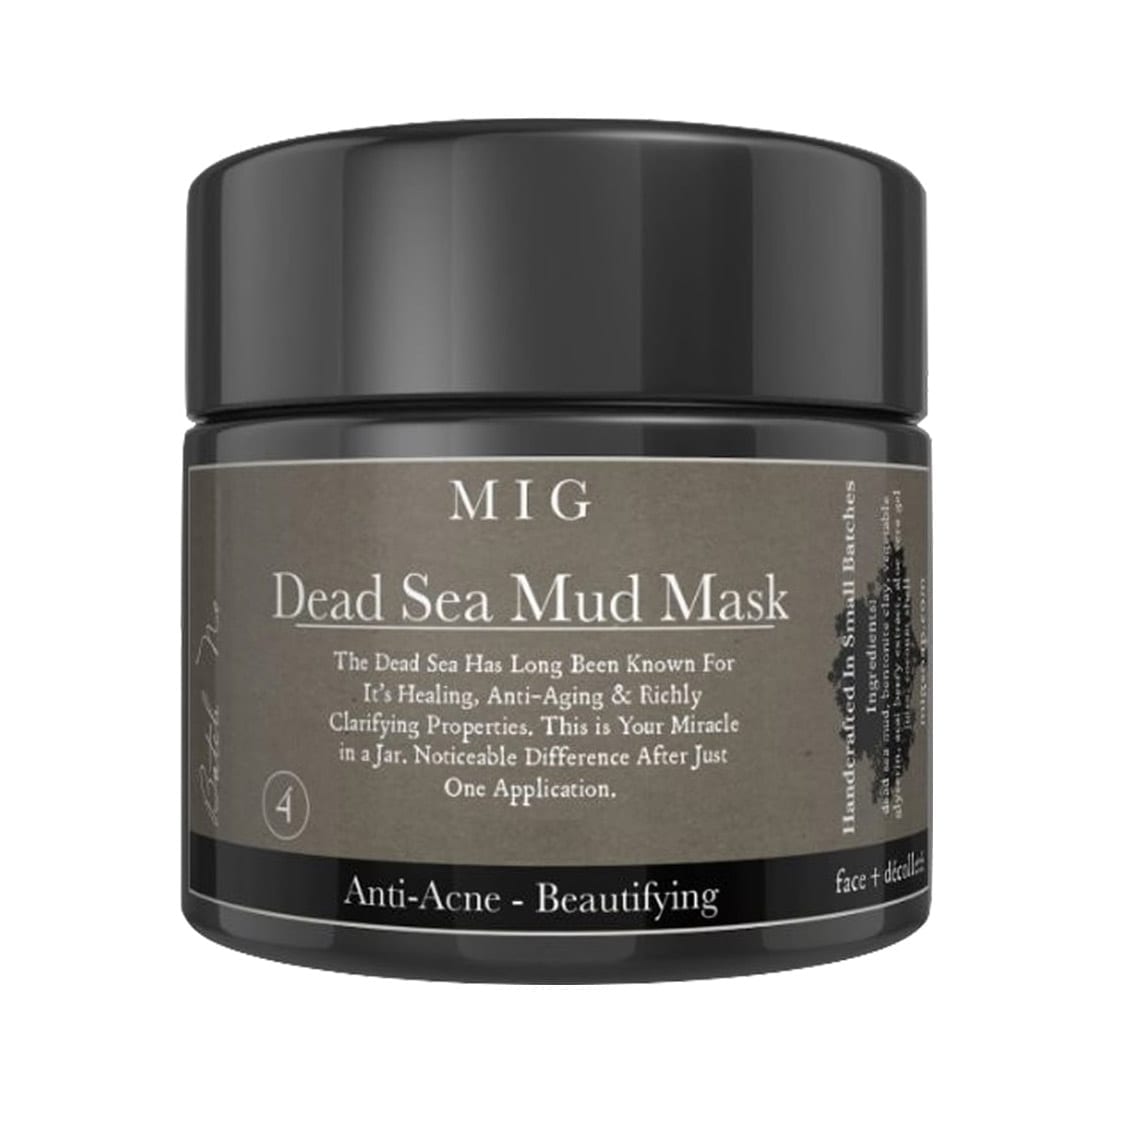 Black container of Dead Sea Mud Mask showcasing custom shrink sleeve labels.